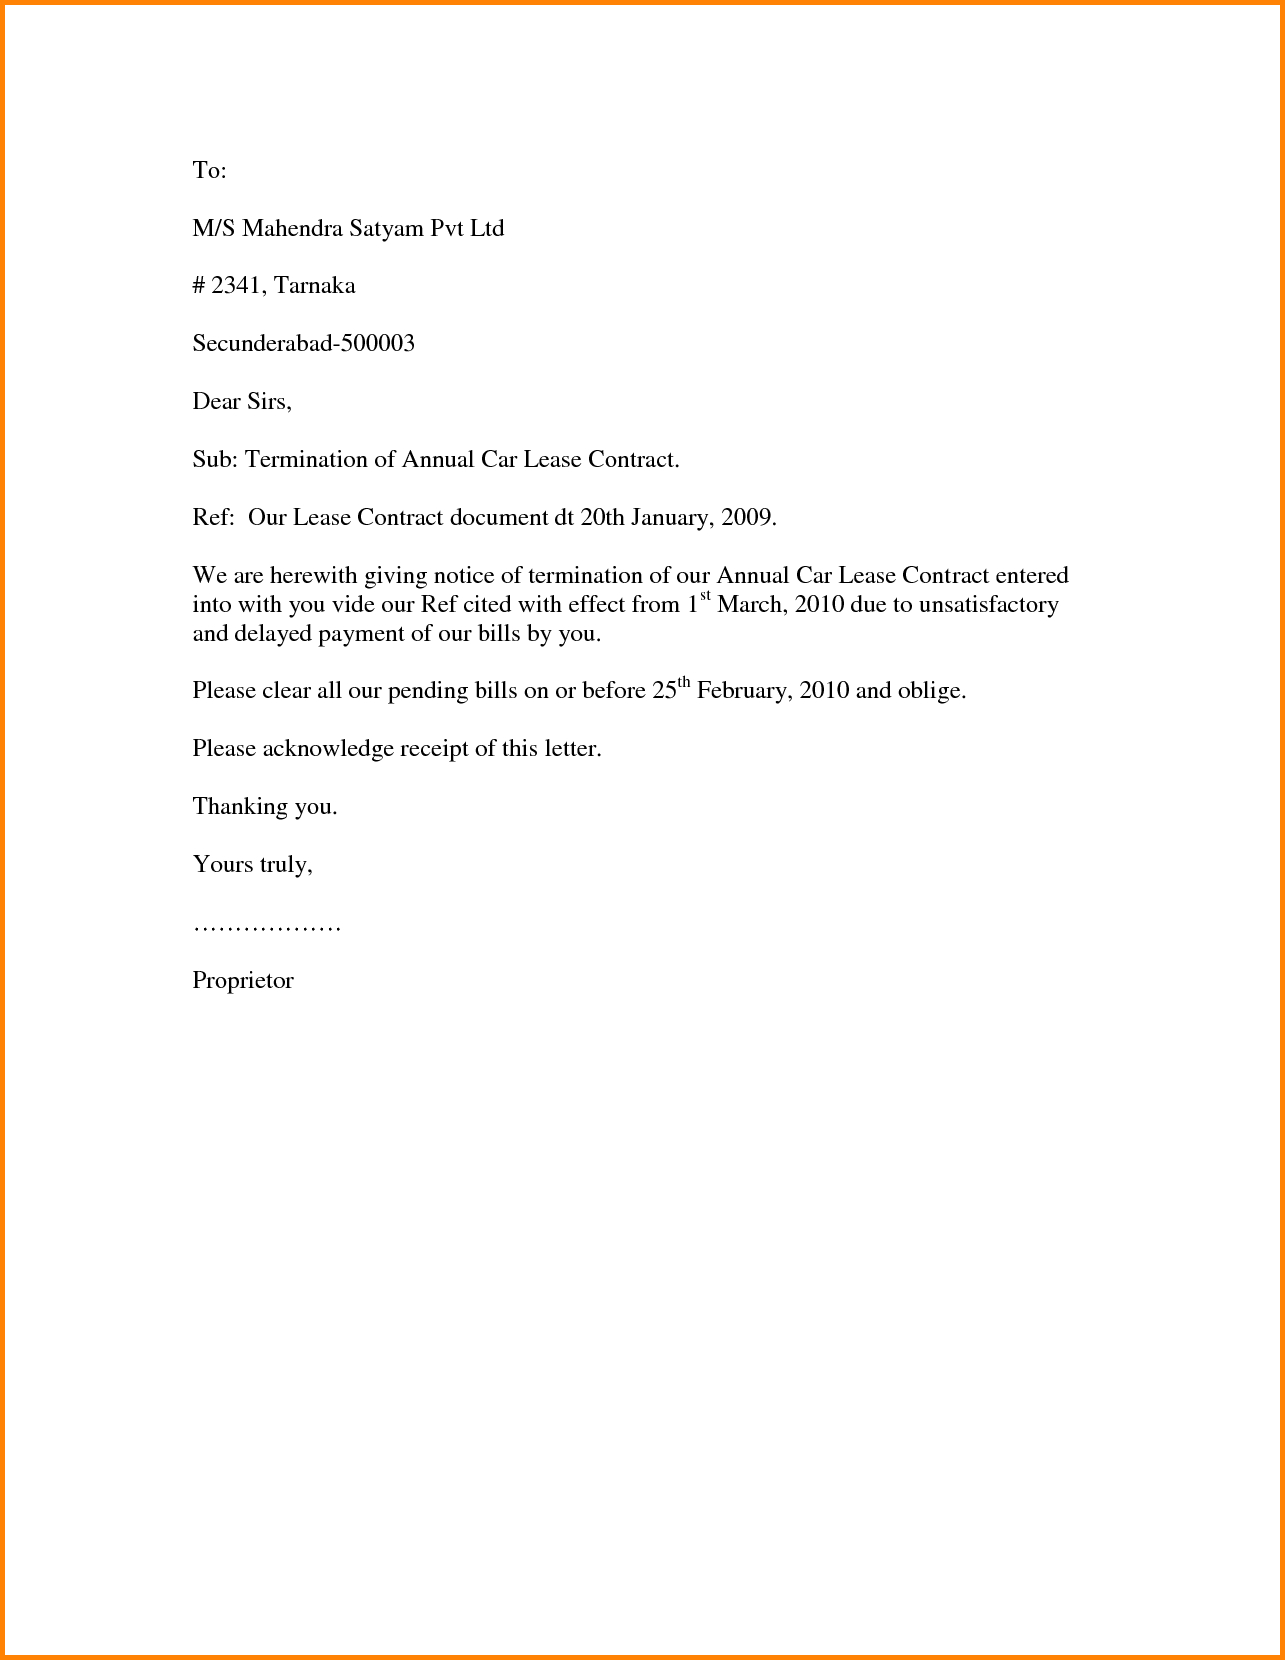 end of lease letter template Collection-Letter Template To End A Contract Copy Contract Letter Work Sample 18-t